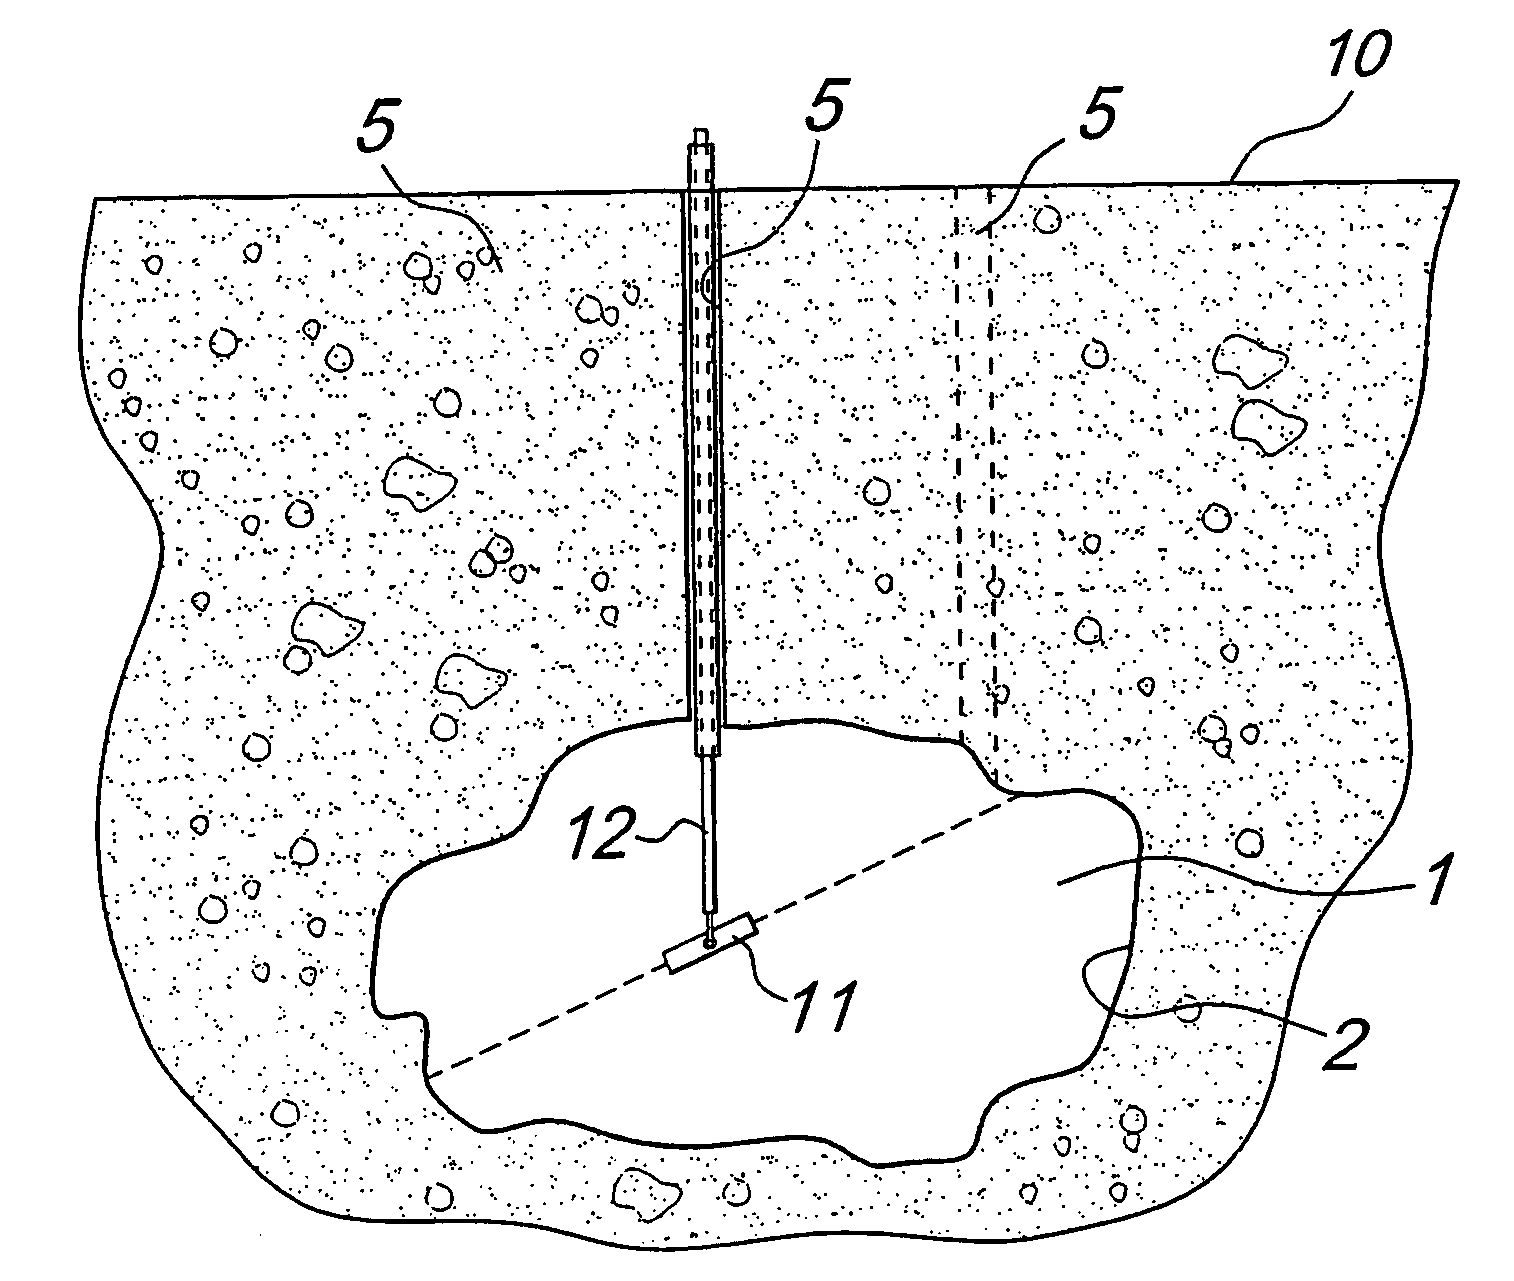 Method for saturating cavities present in a mass of soil or in a body in general